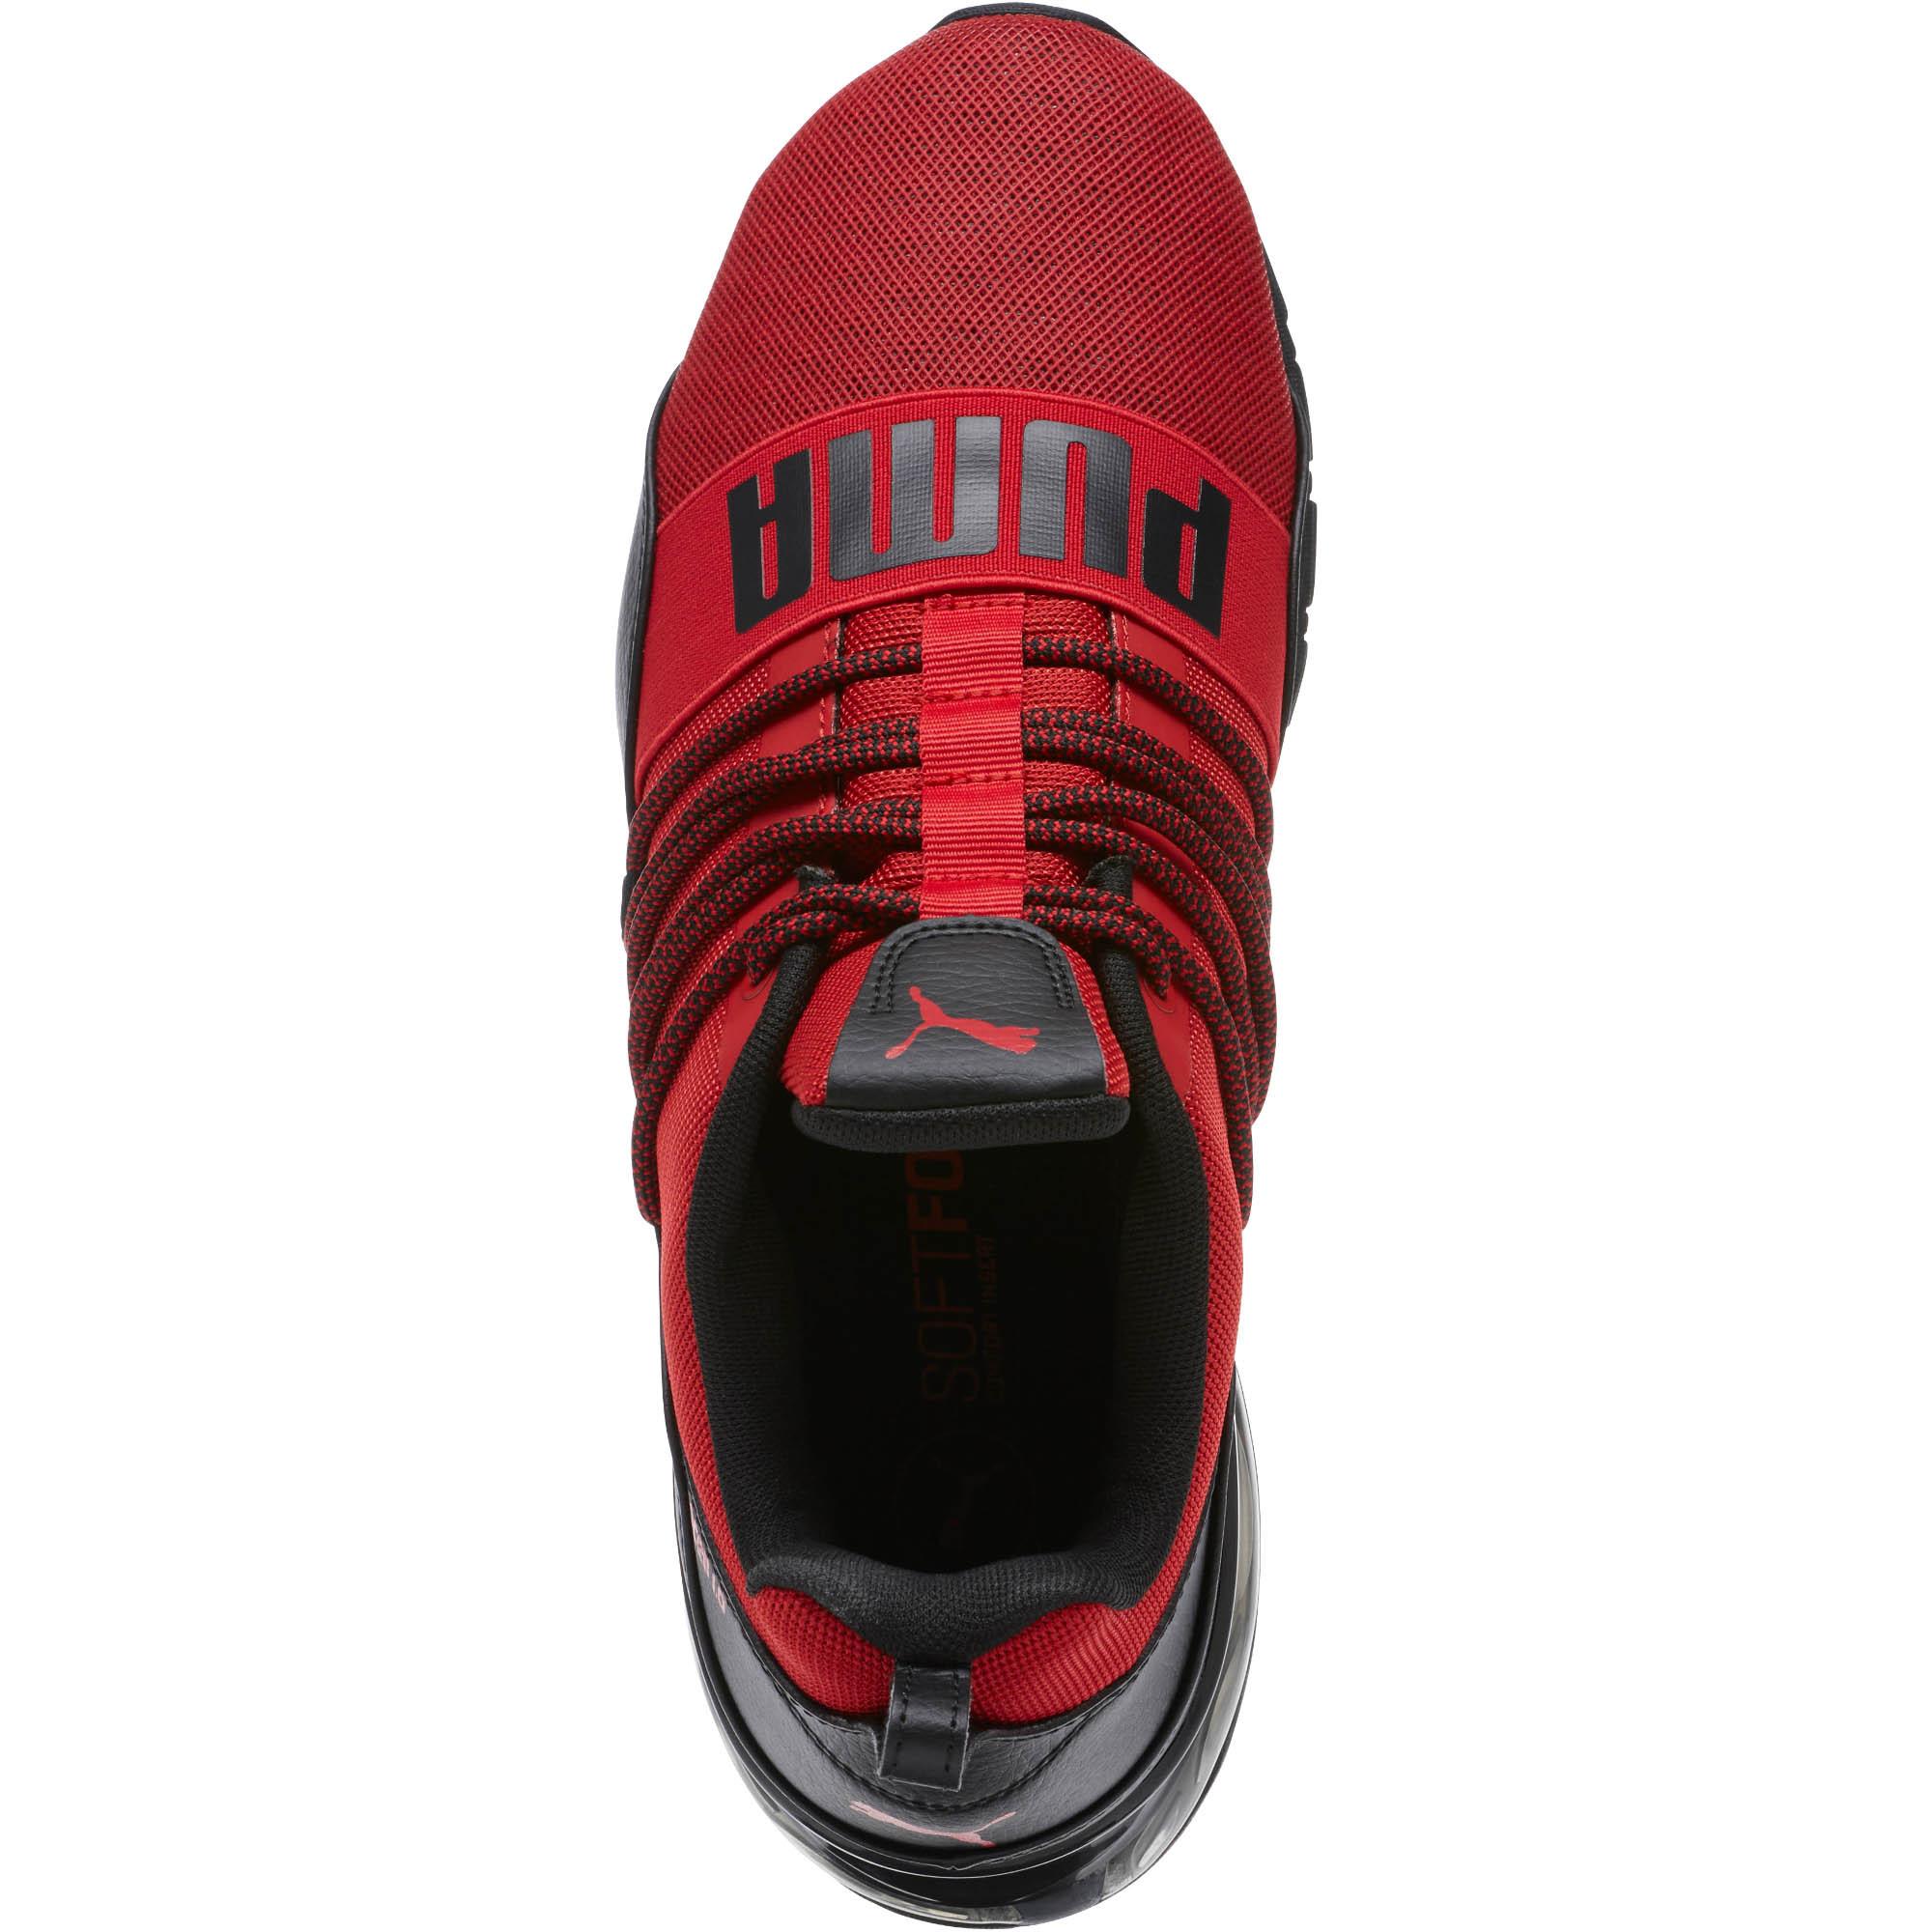 PUMA Cell Regulate Krm Sneaker in Red for Men - Lyst